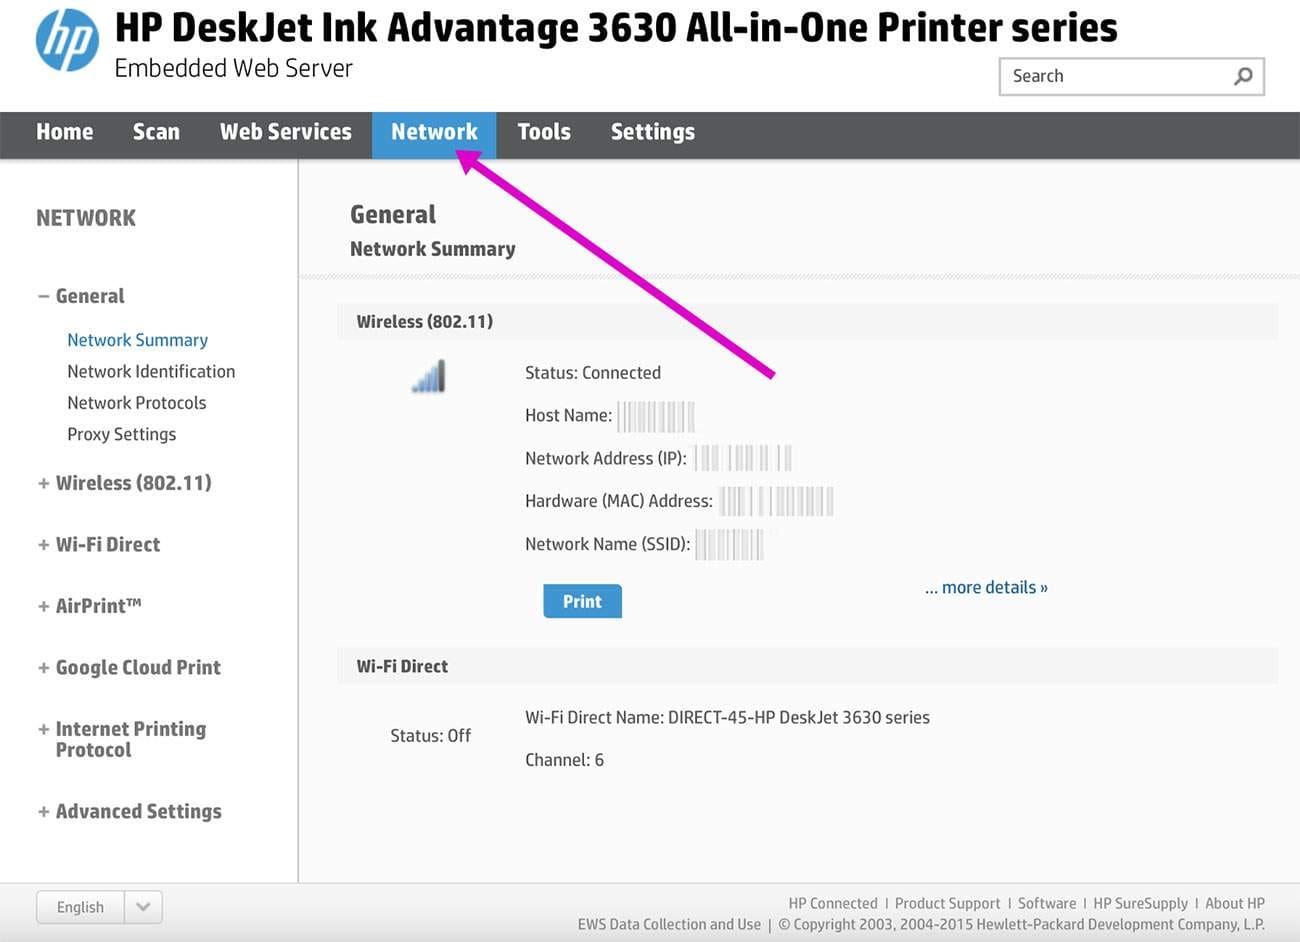 Fixes for No AirPrint Printers Found - 8